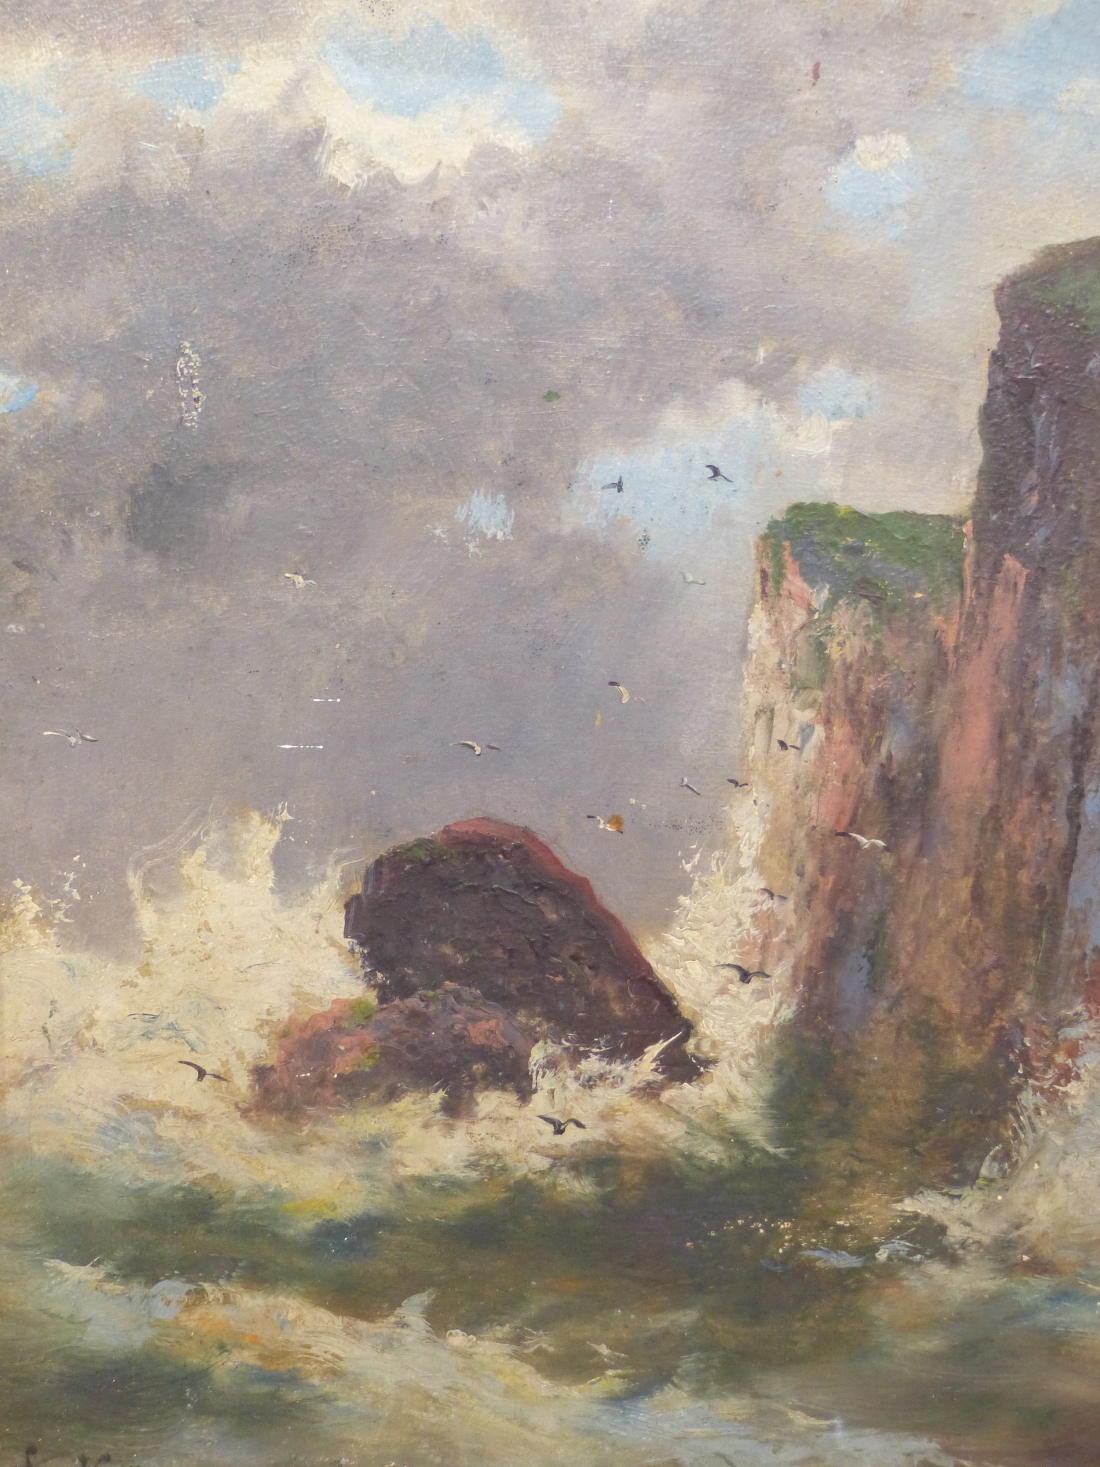 SAMUEL COX (EARLY 20TH CENTURY), A SHIP WRECK NEAR CLIFFS, AND COMPANION OF STORMY SEAS, SIGNED,